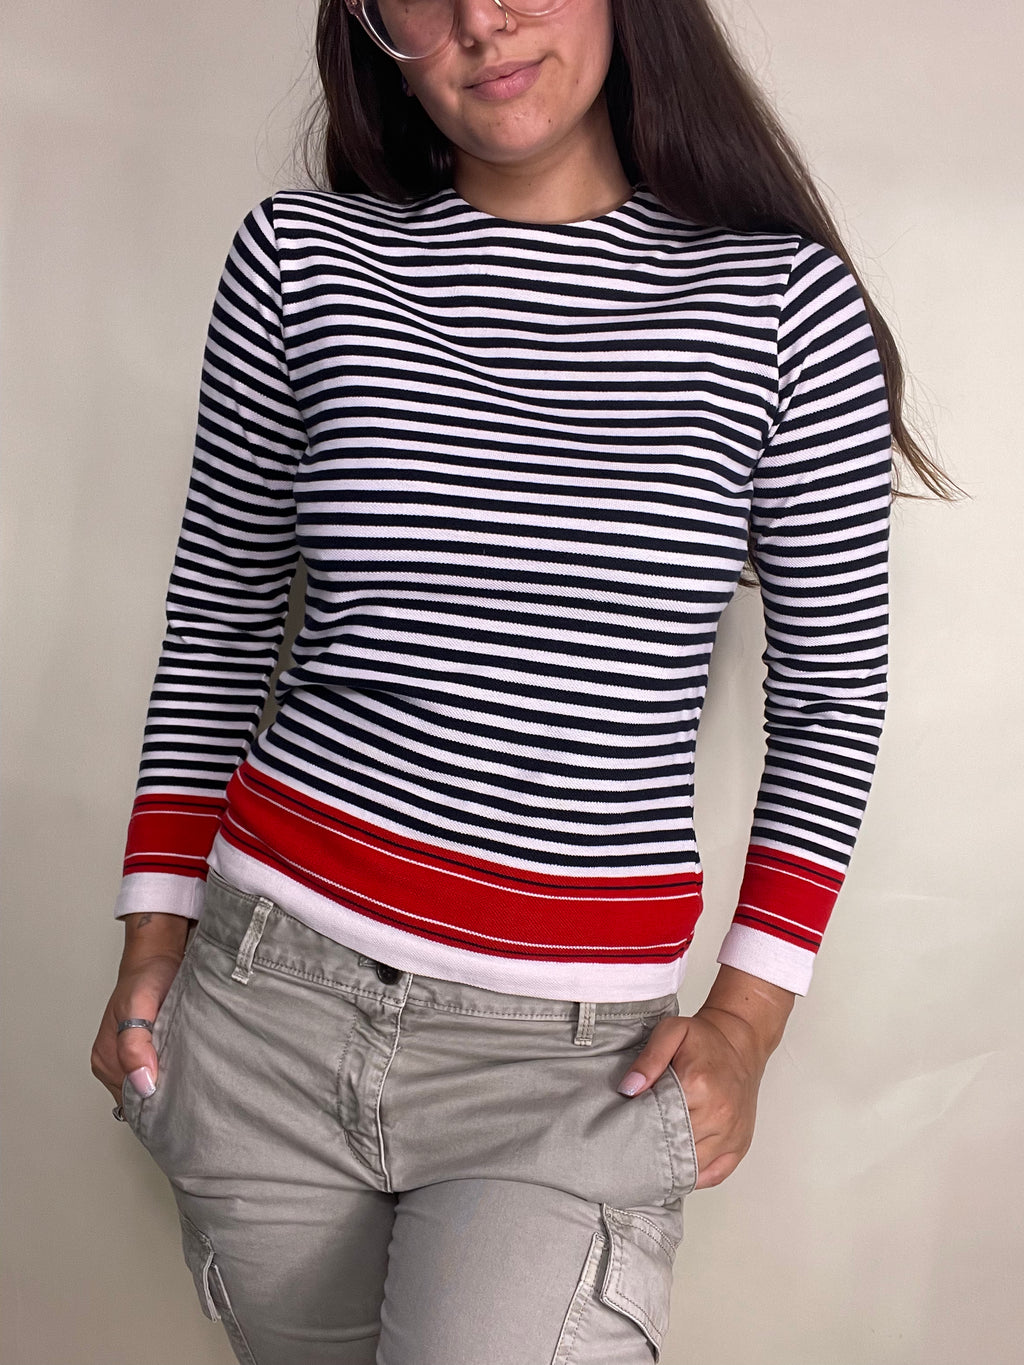 70s striped blouse, Size S